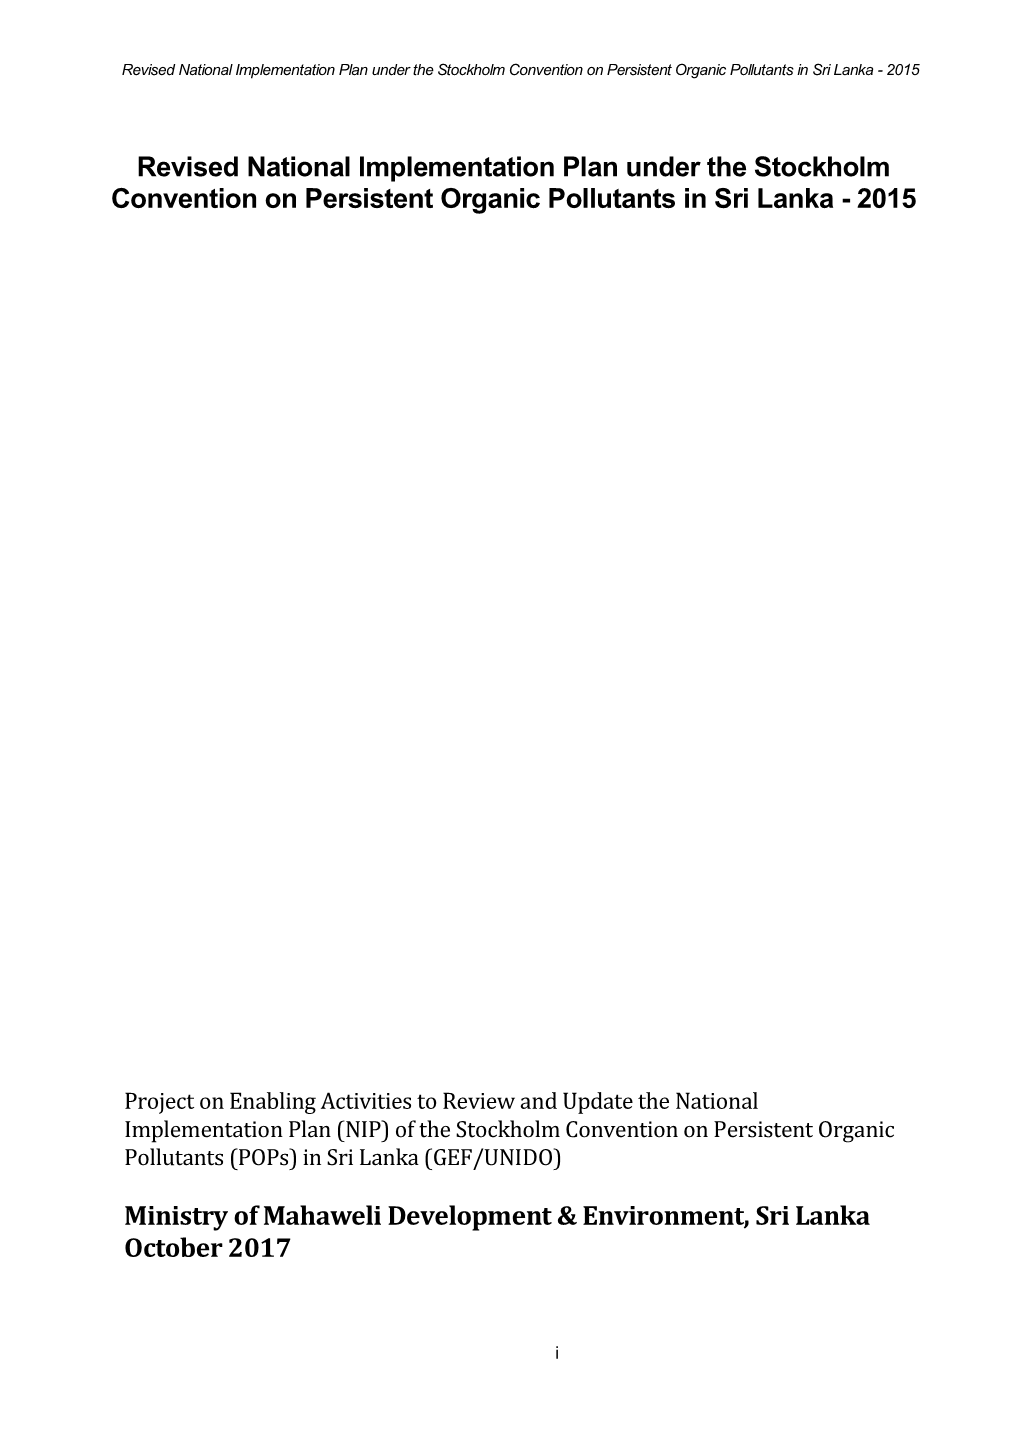 Revised National Implementation Plan Under the Stockholm Convention on Persistent Organic Pollutants in Sri Lanka - 2015